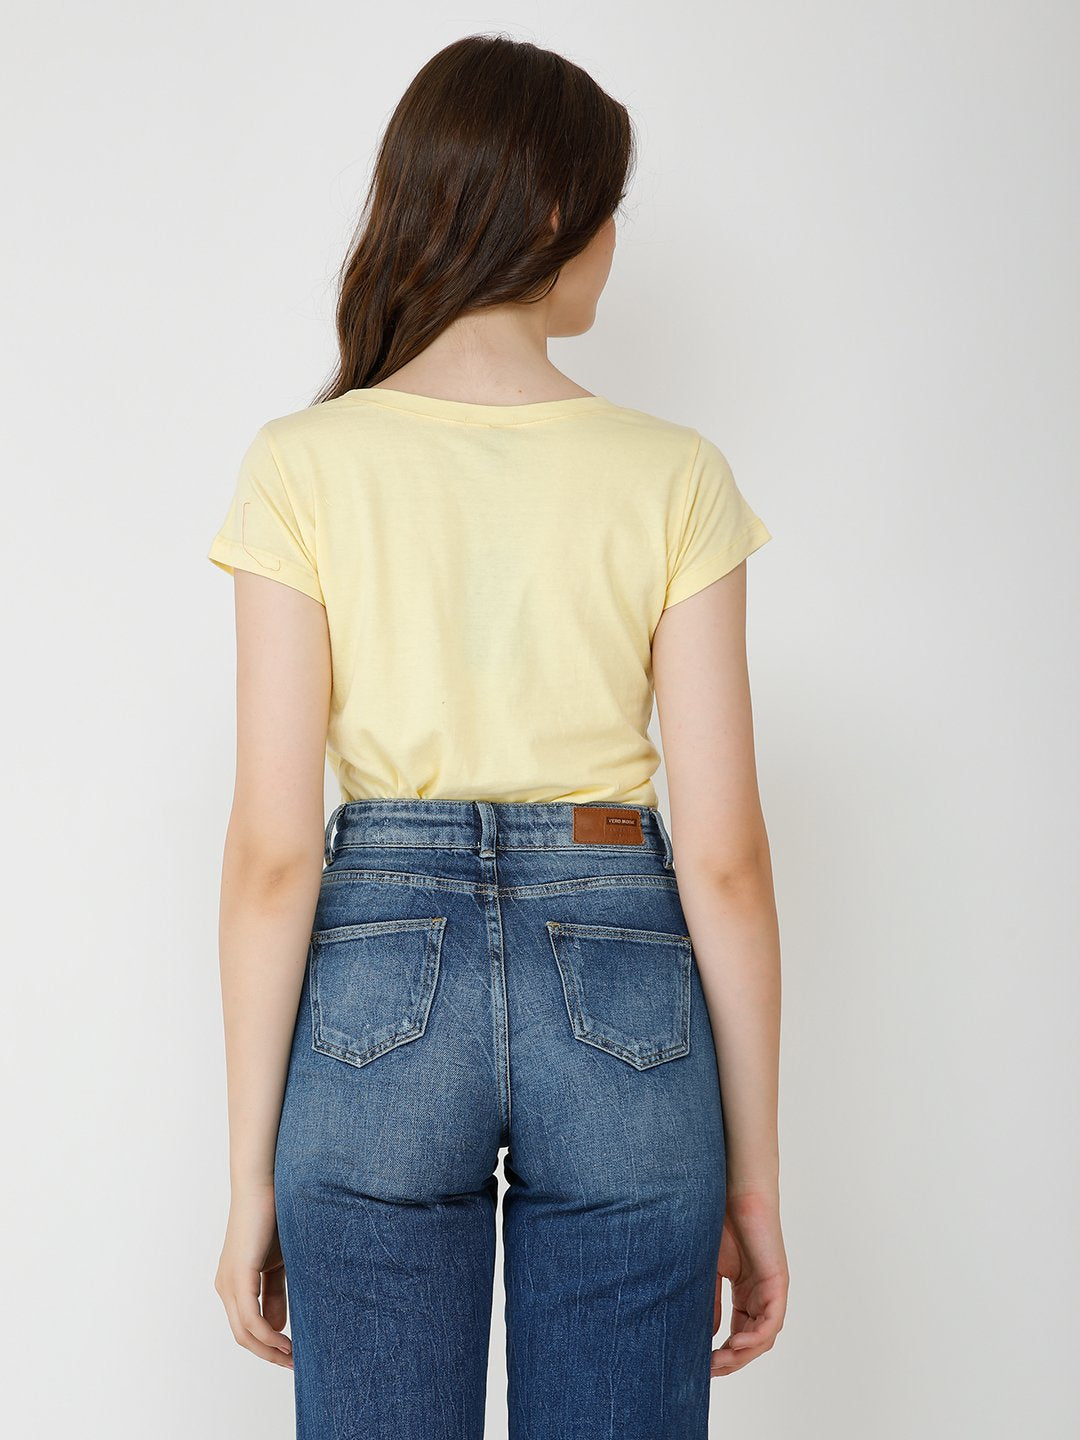 yellow solid top